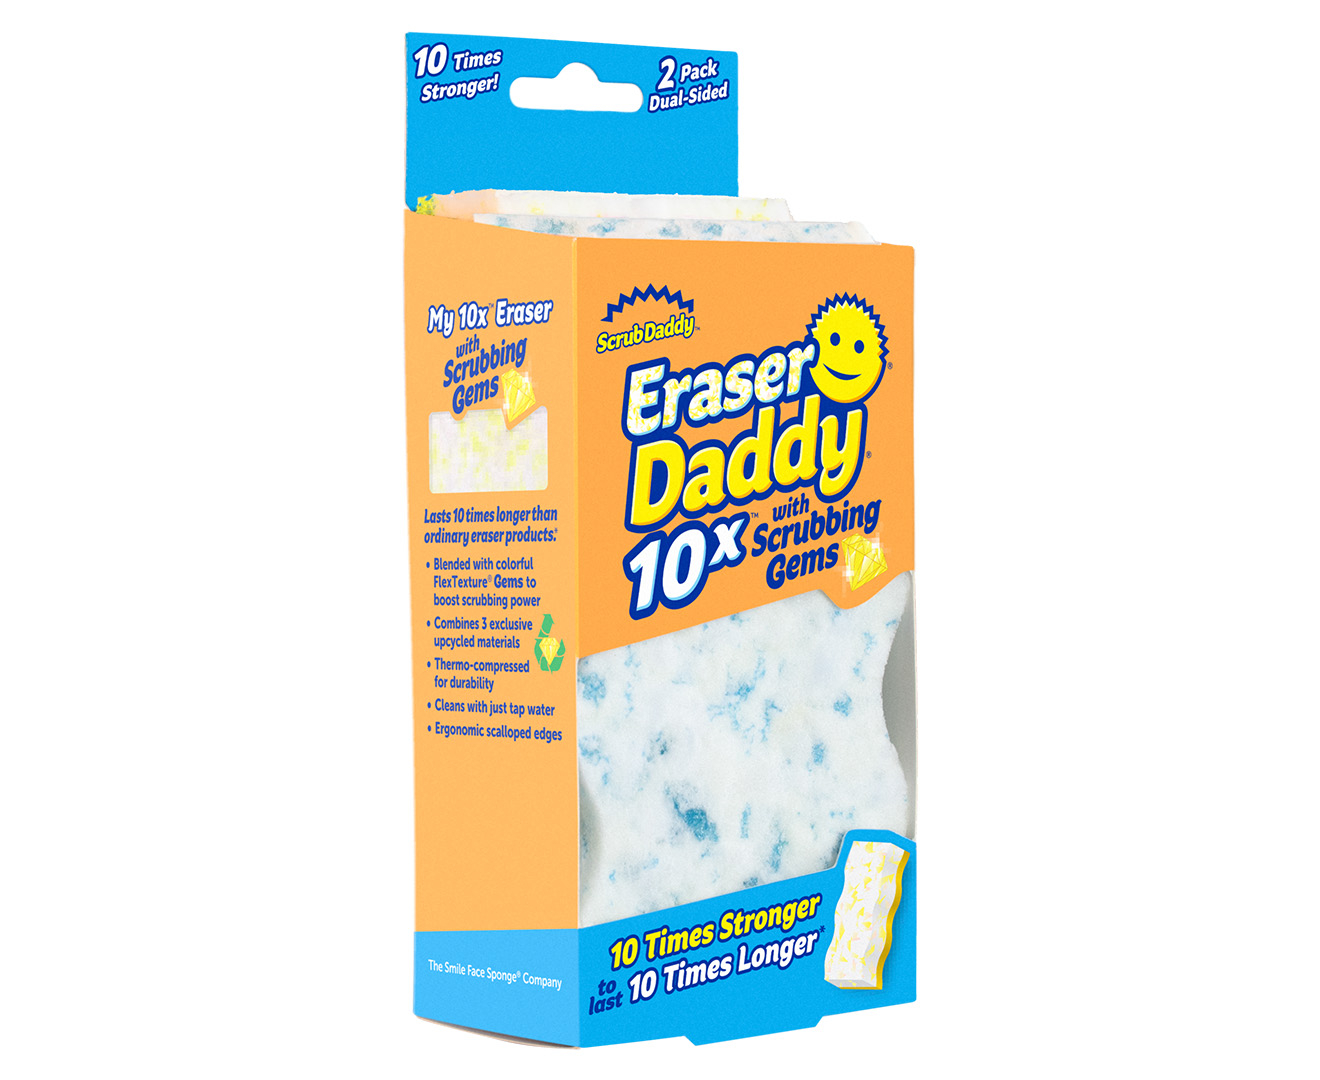 Scrub Daddy Eraser Daddy Sheets - 10x More Durable Than Traditional Erasers  with Scrubbing Gems - Removes Dirt, Scuffs & Stains - Water Activated